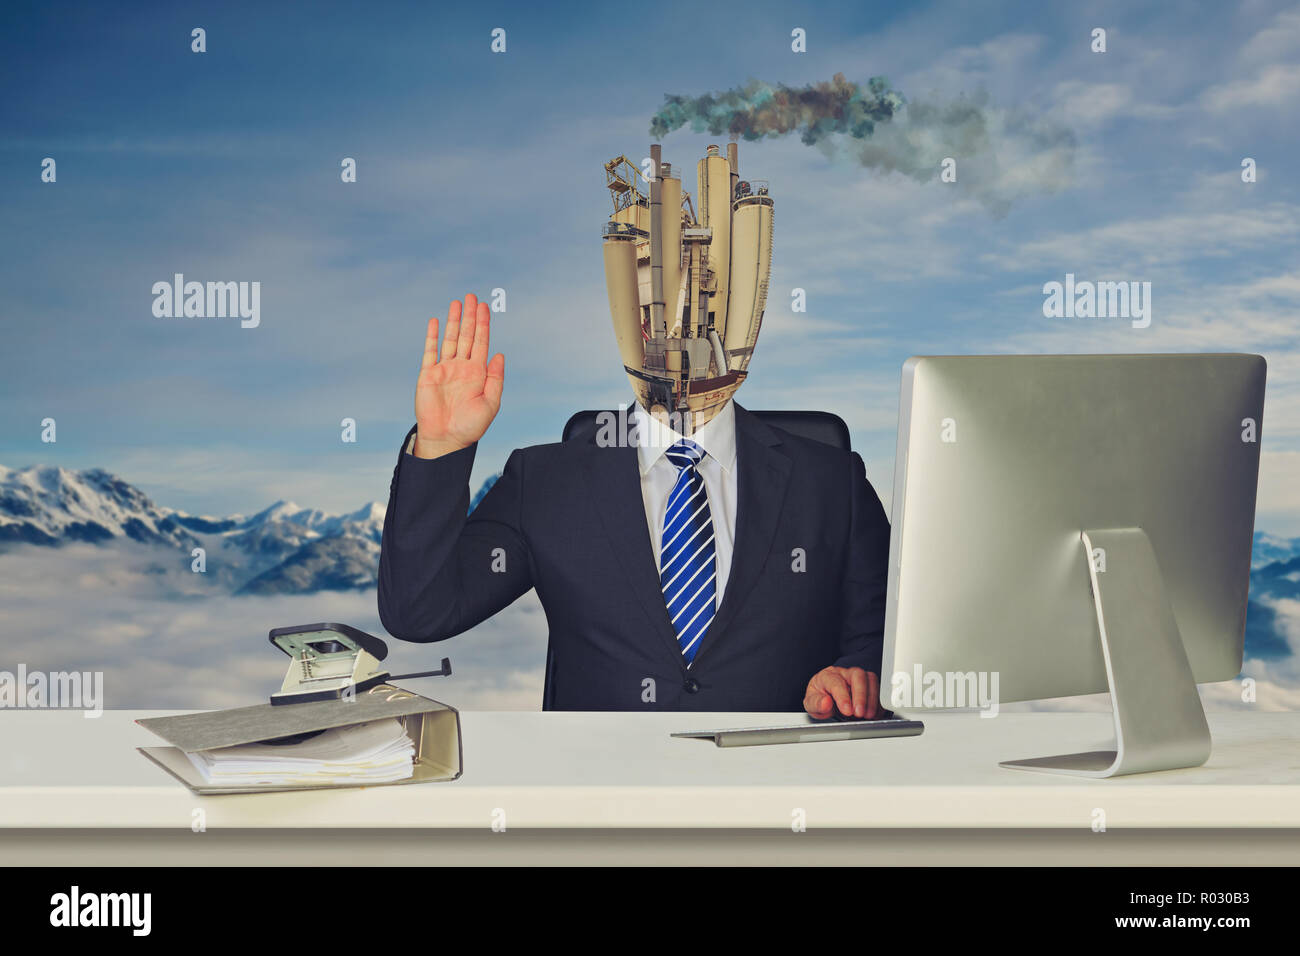 symbolic picture of apathetic colleague and bad working atmosphere in the office Stock Photo